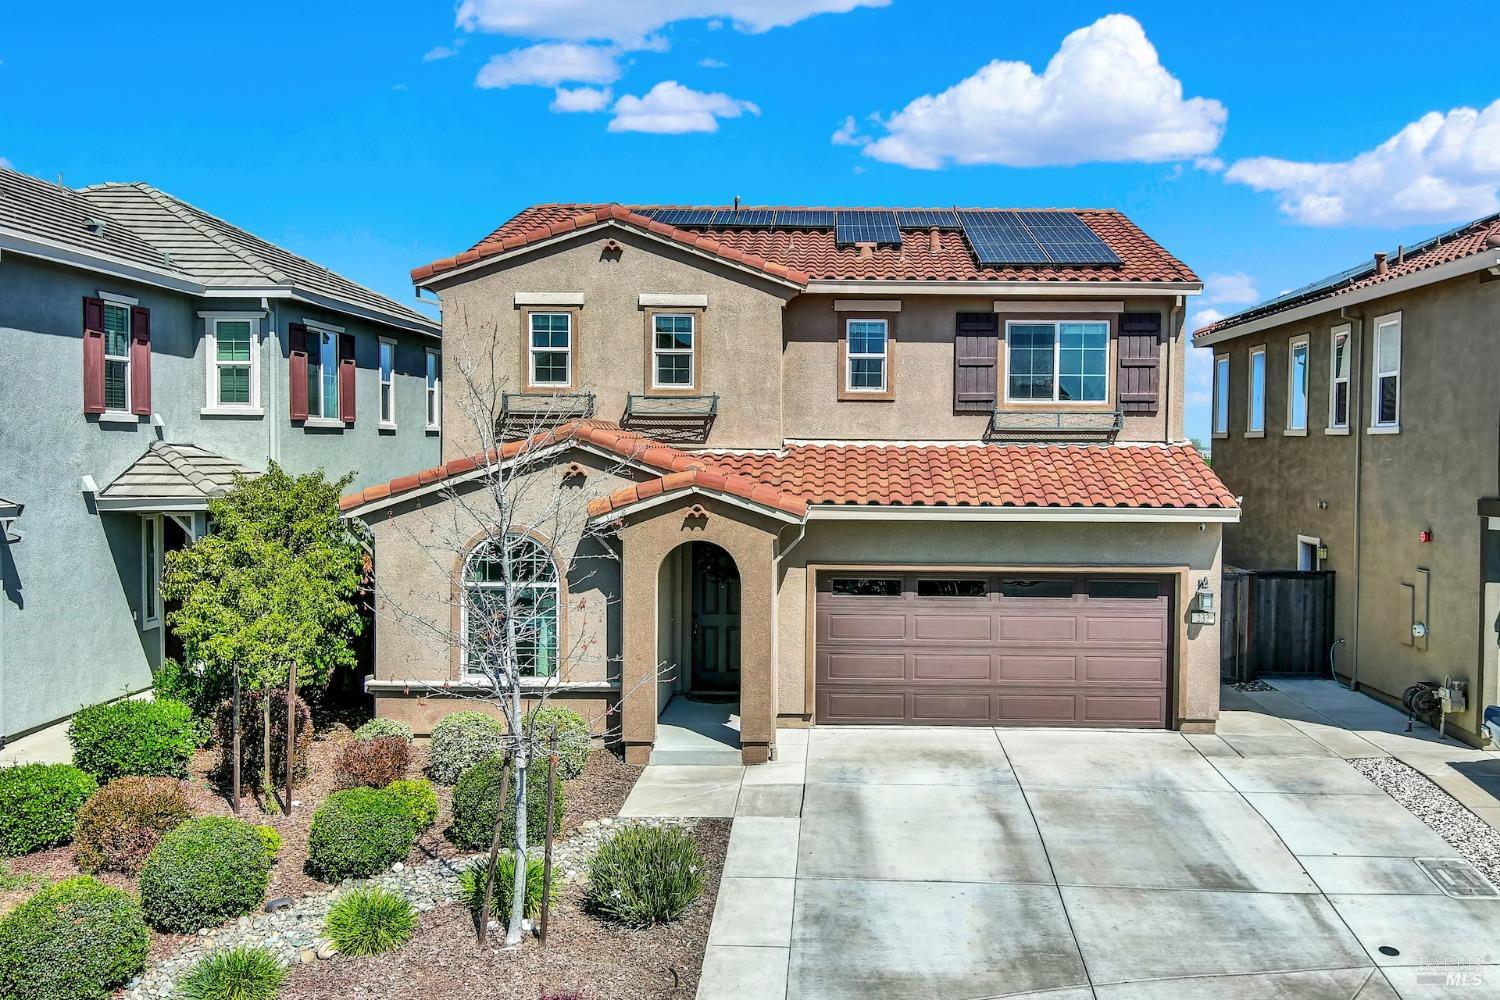 Nestled in the Vanden Ranch community, this exceptional home harmoniously combines modern sophistica